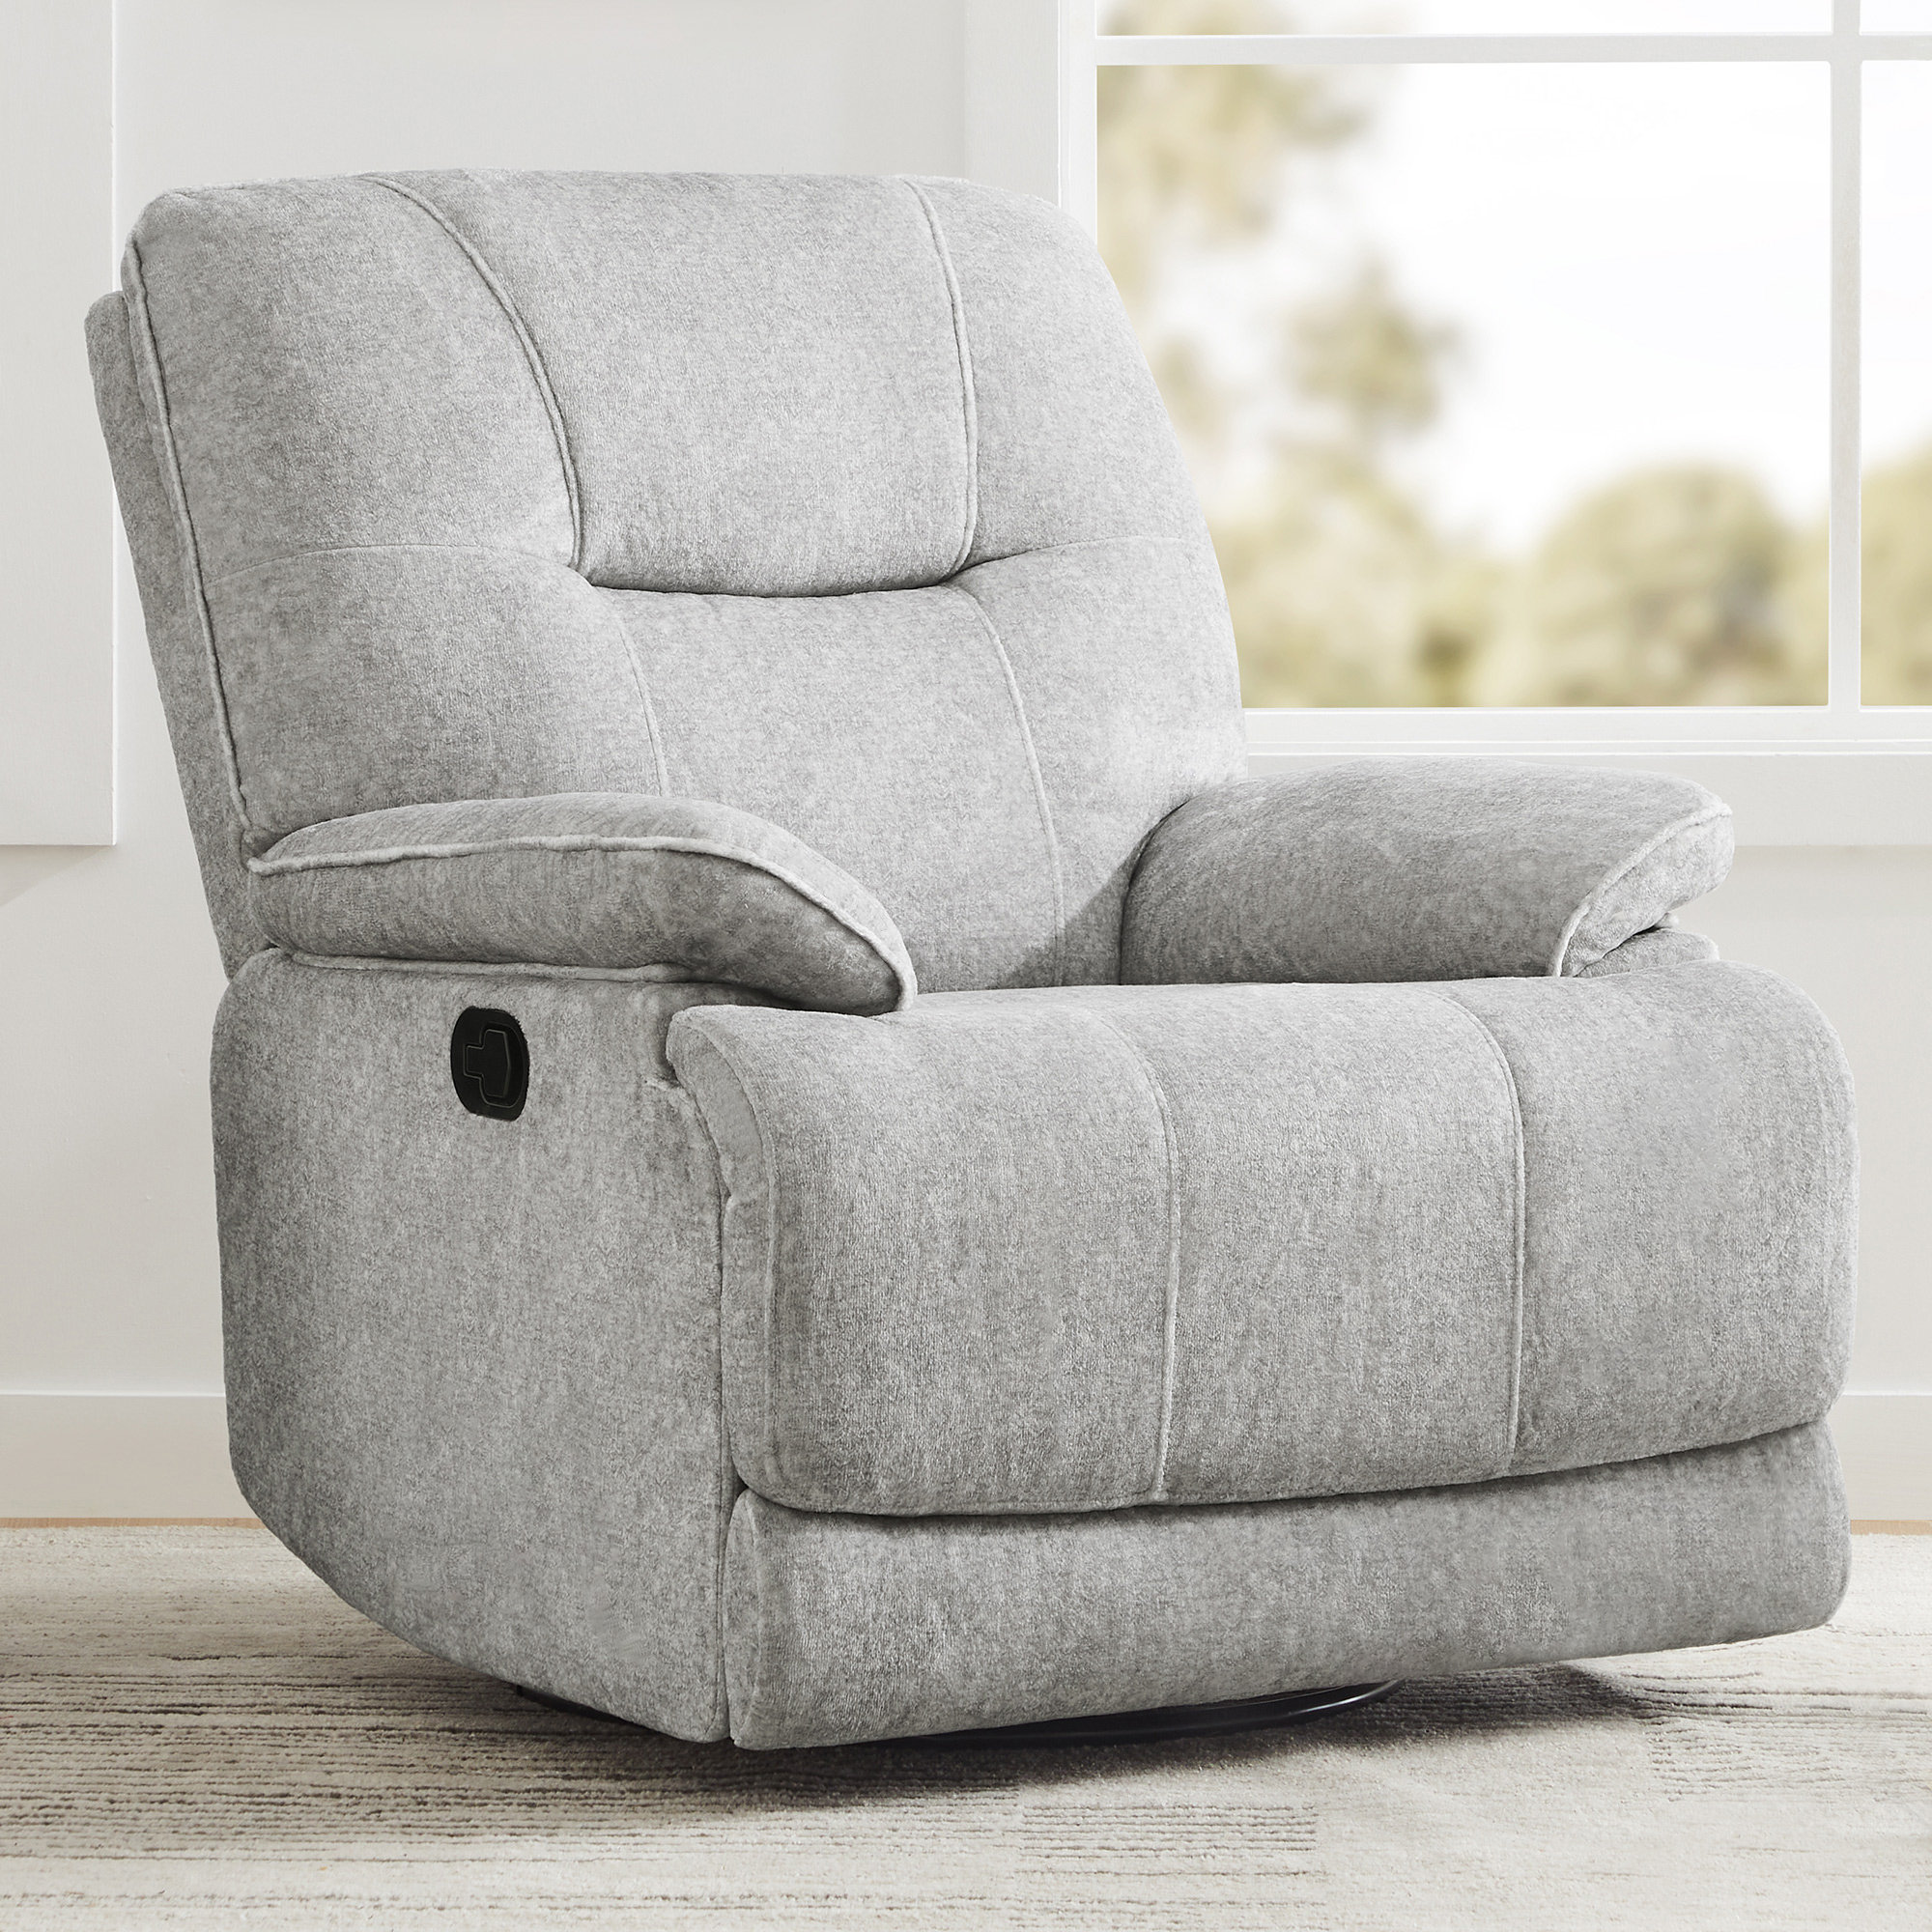 Taylor + Logan 27 in. W Gray Upholstered Transitional Style Pillow Back Recliner with Accent Nail Trim and Pushback Recline, Light Gray